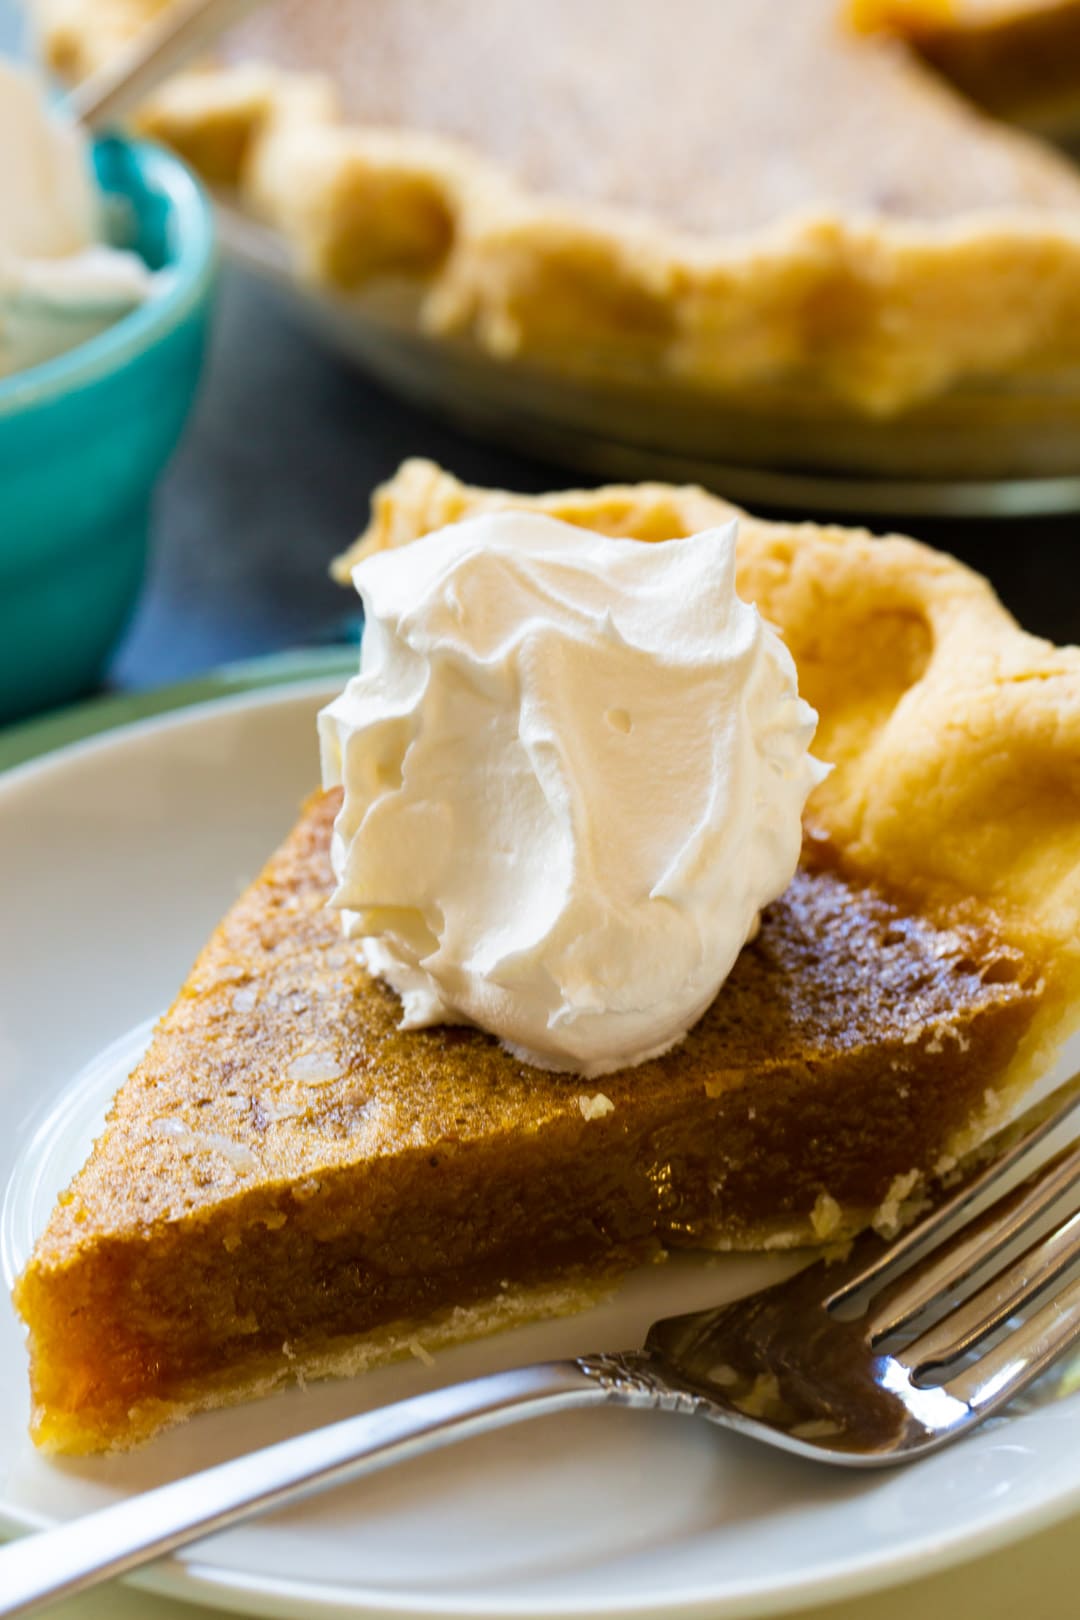 Slice of Caramel Chess Pie topped with whipped cream.